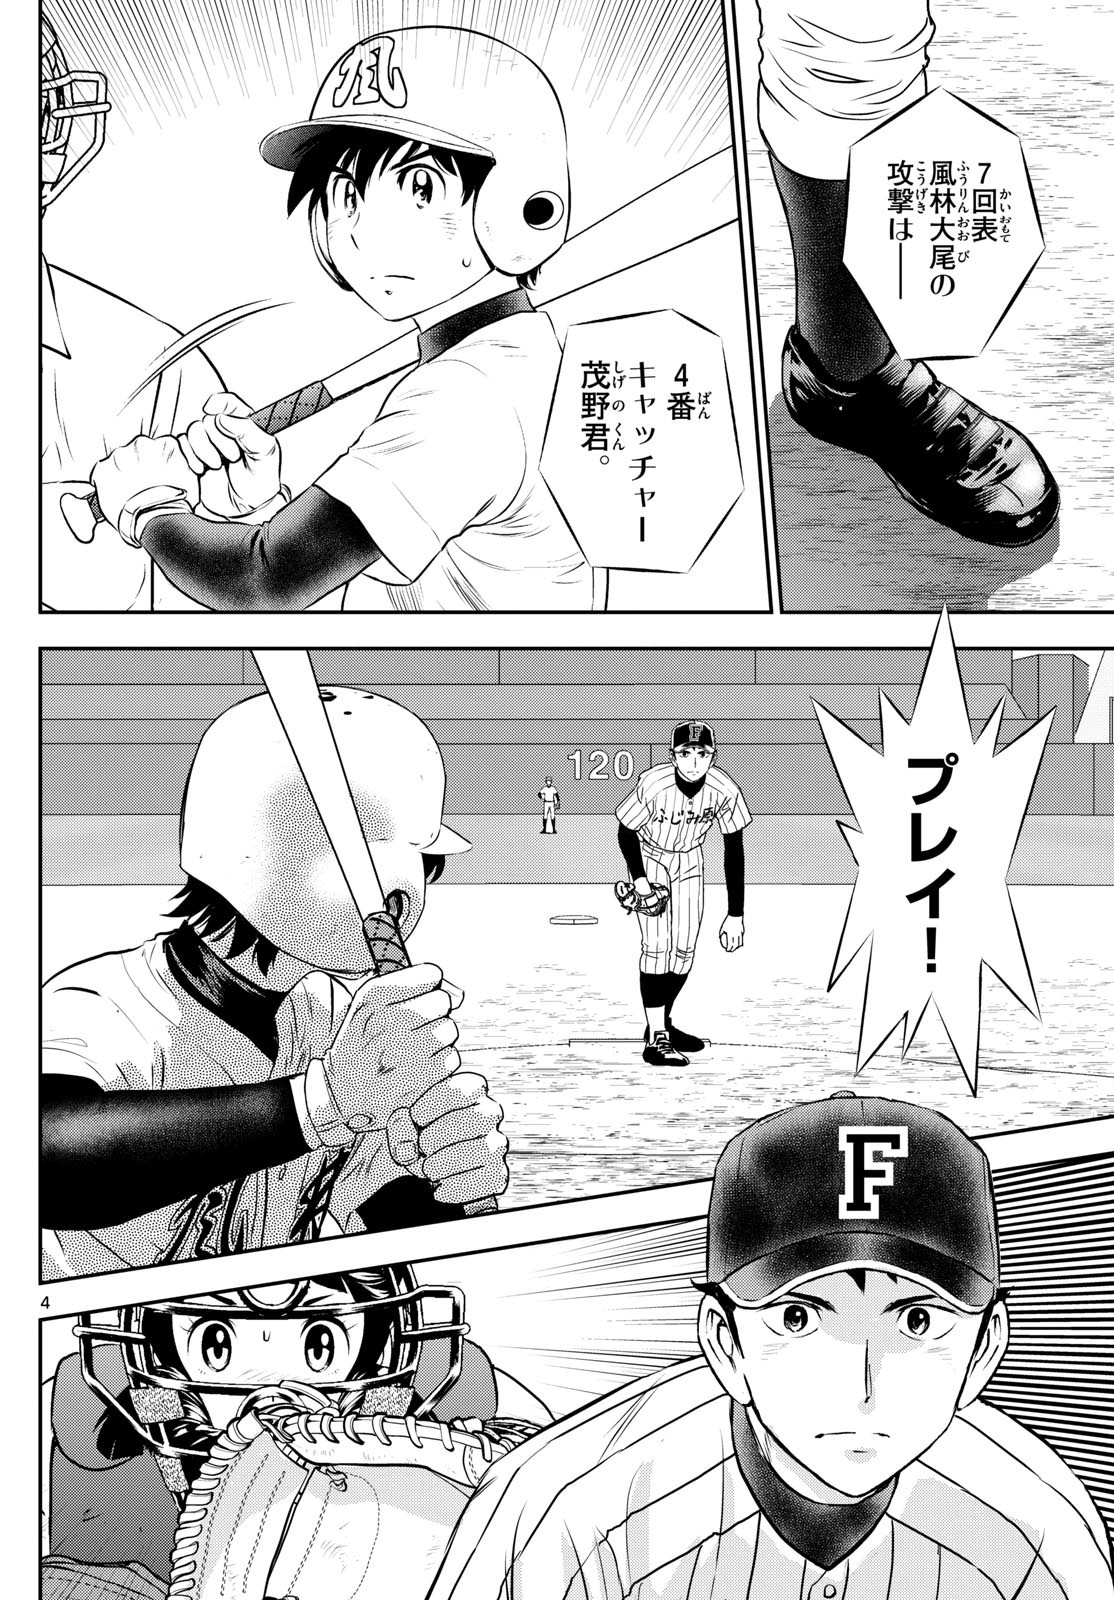 Major 2nd - メジャーセカンド - Chapter 274 - Page 4